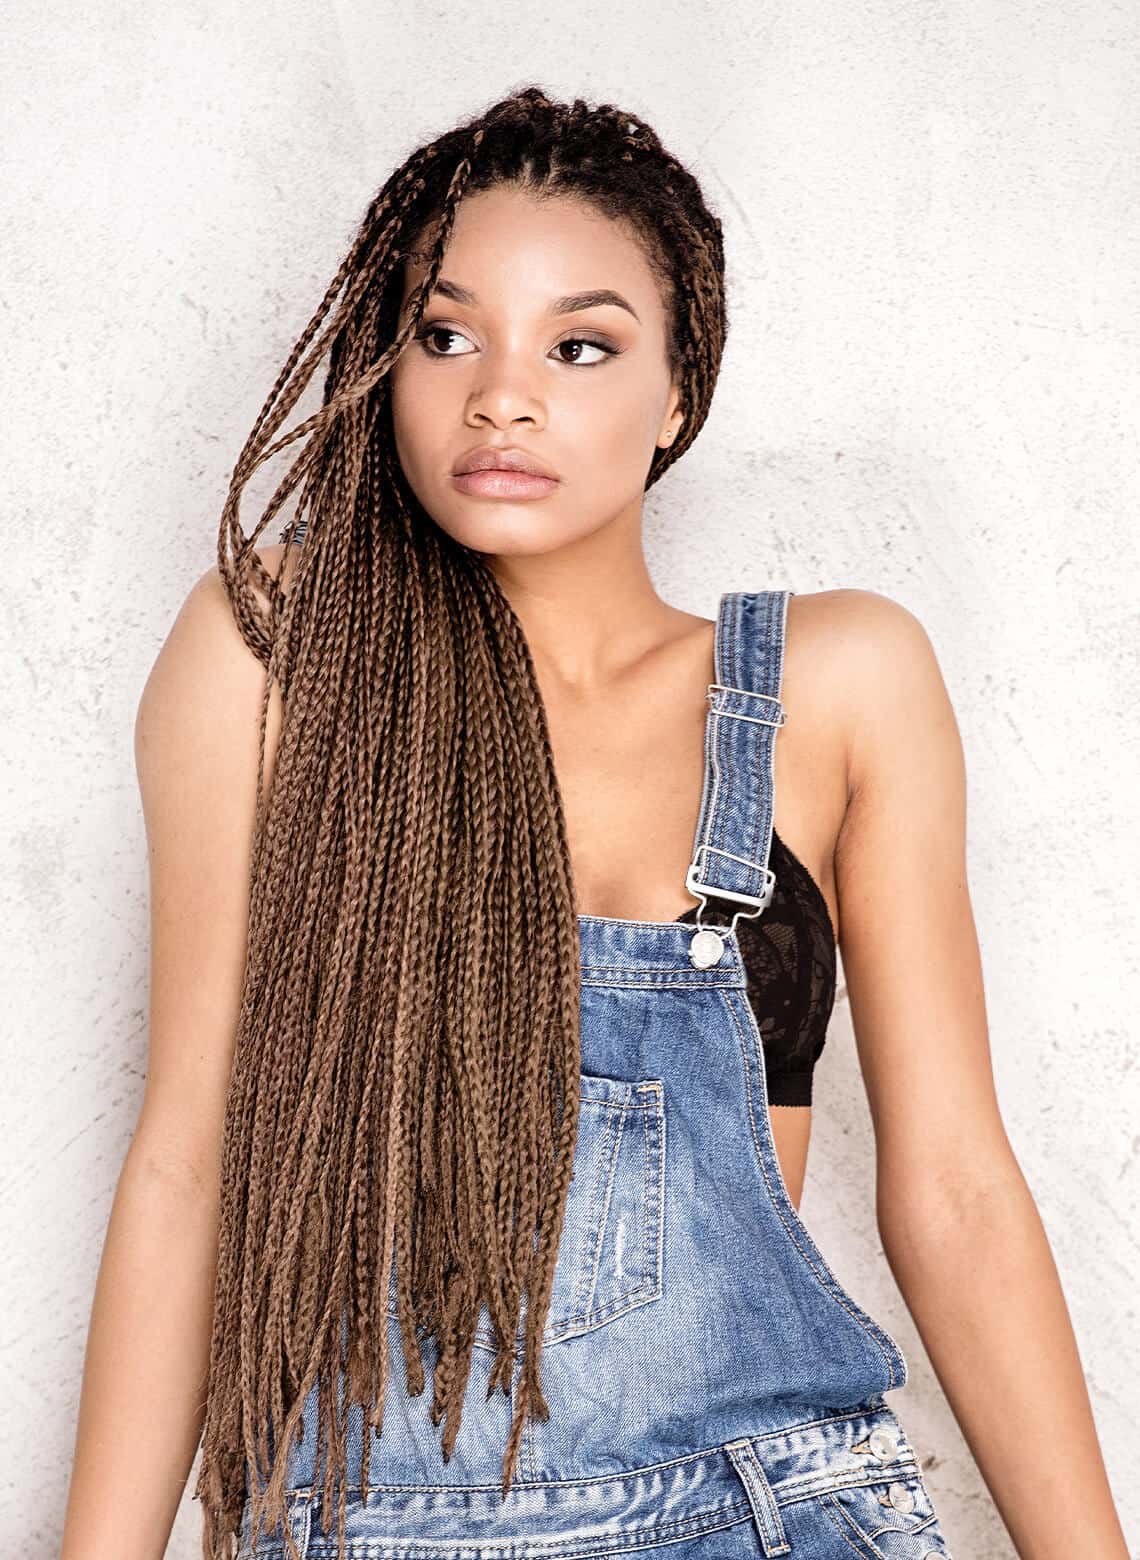 person with long microbraids swept over one shoulder wearing denim overalls and a black bralette underneath